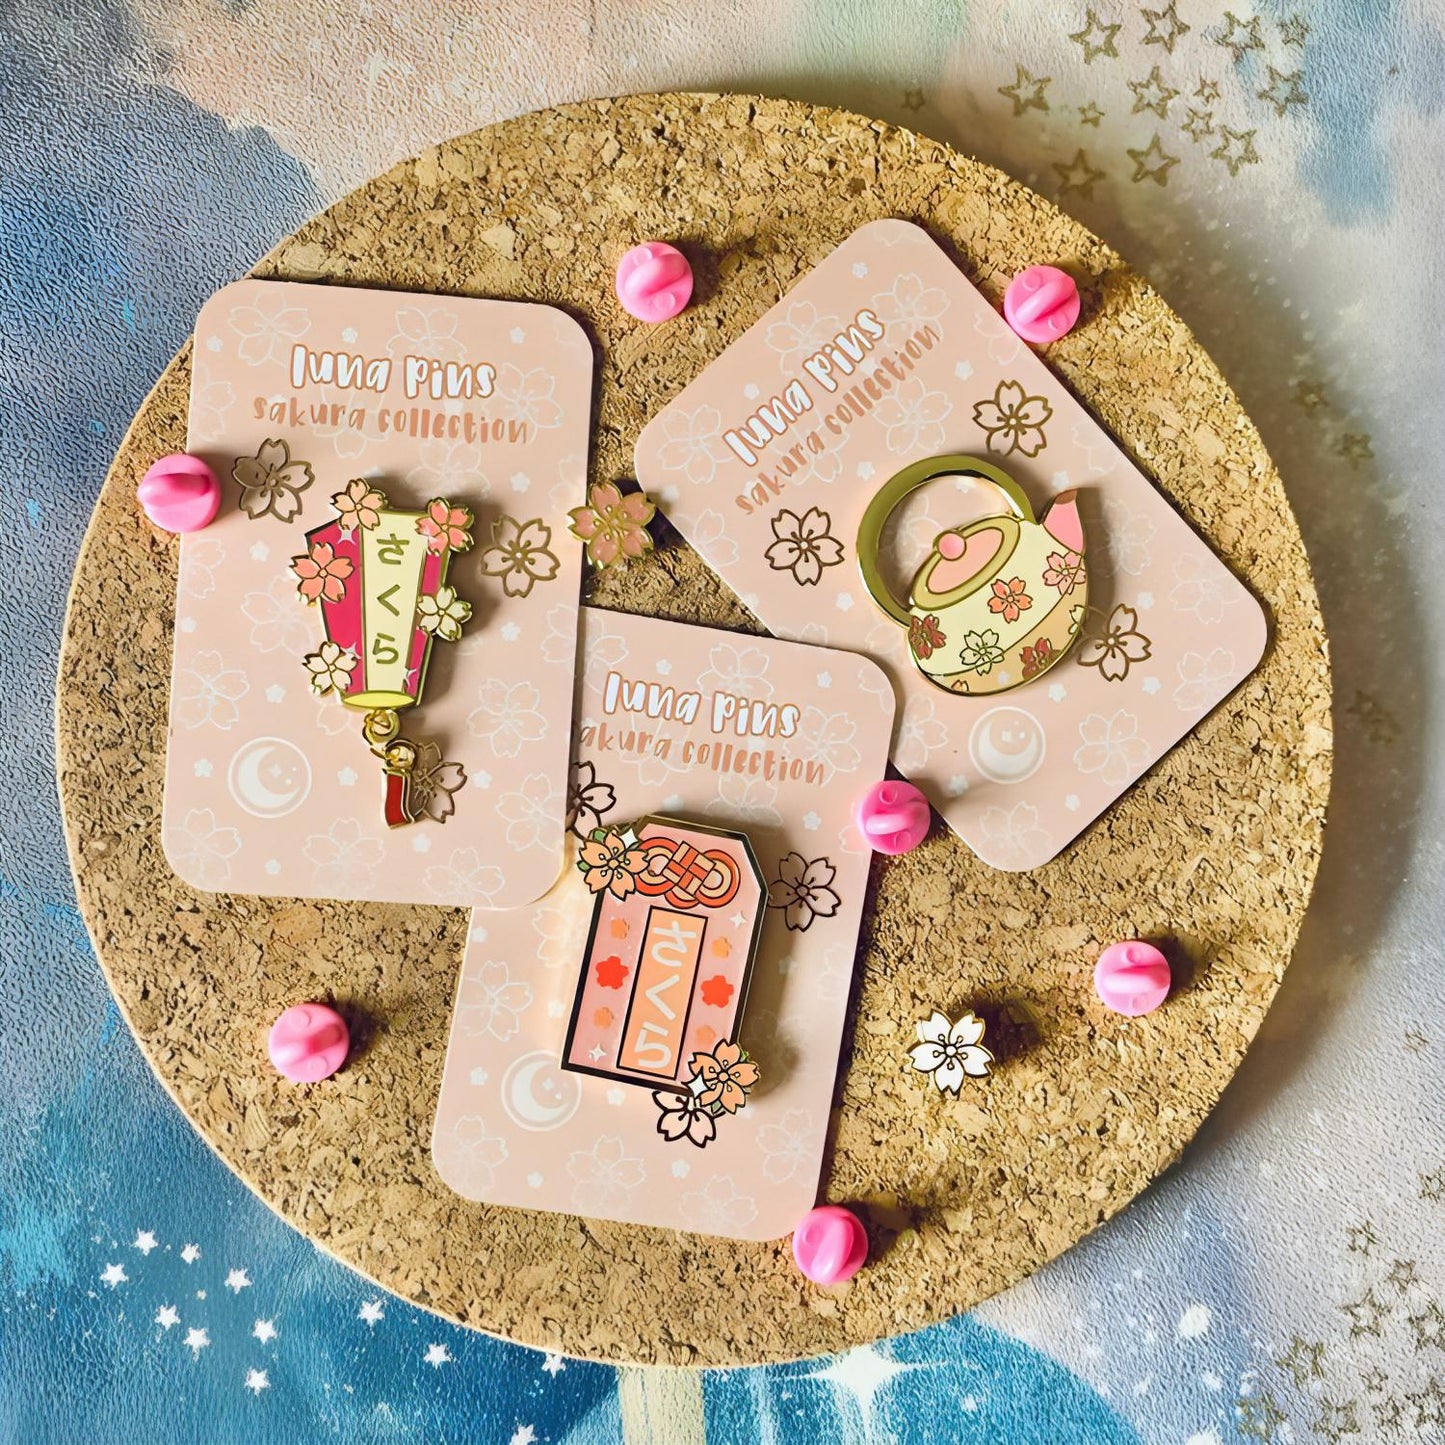 The pin is pictured with other pins in the sakura collection, including a teapot and a omamori charm. There are also miniature sakura flower pins.